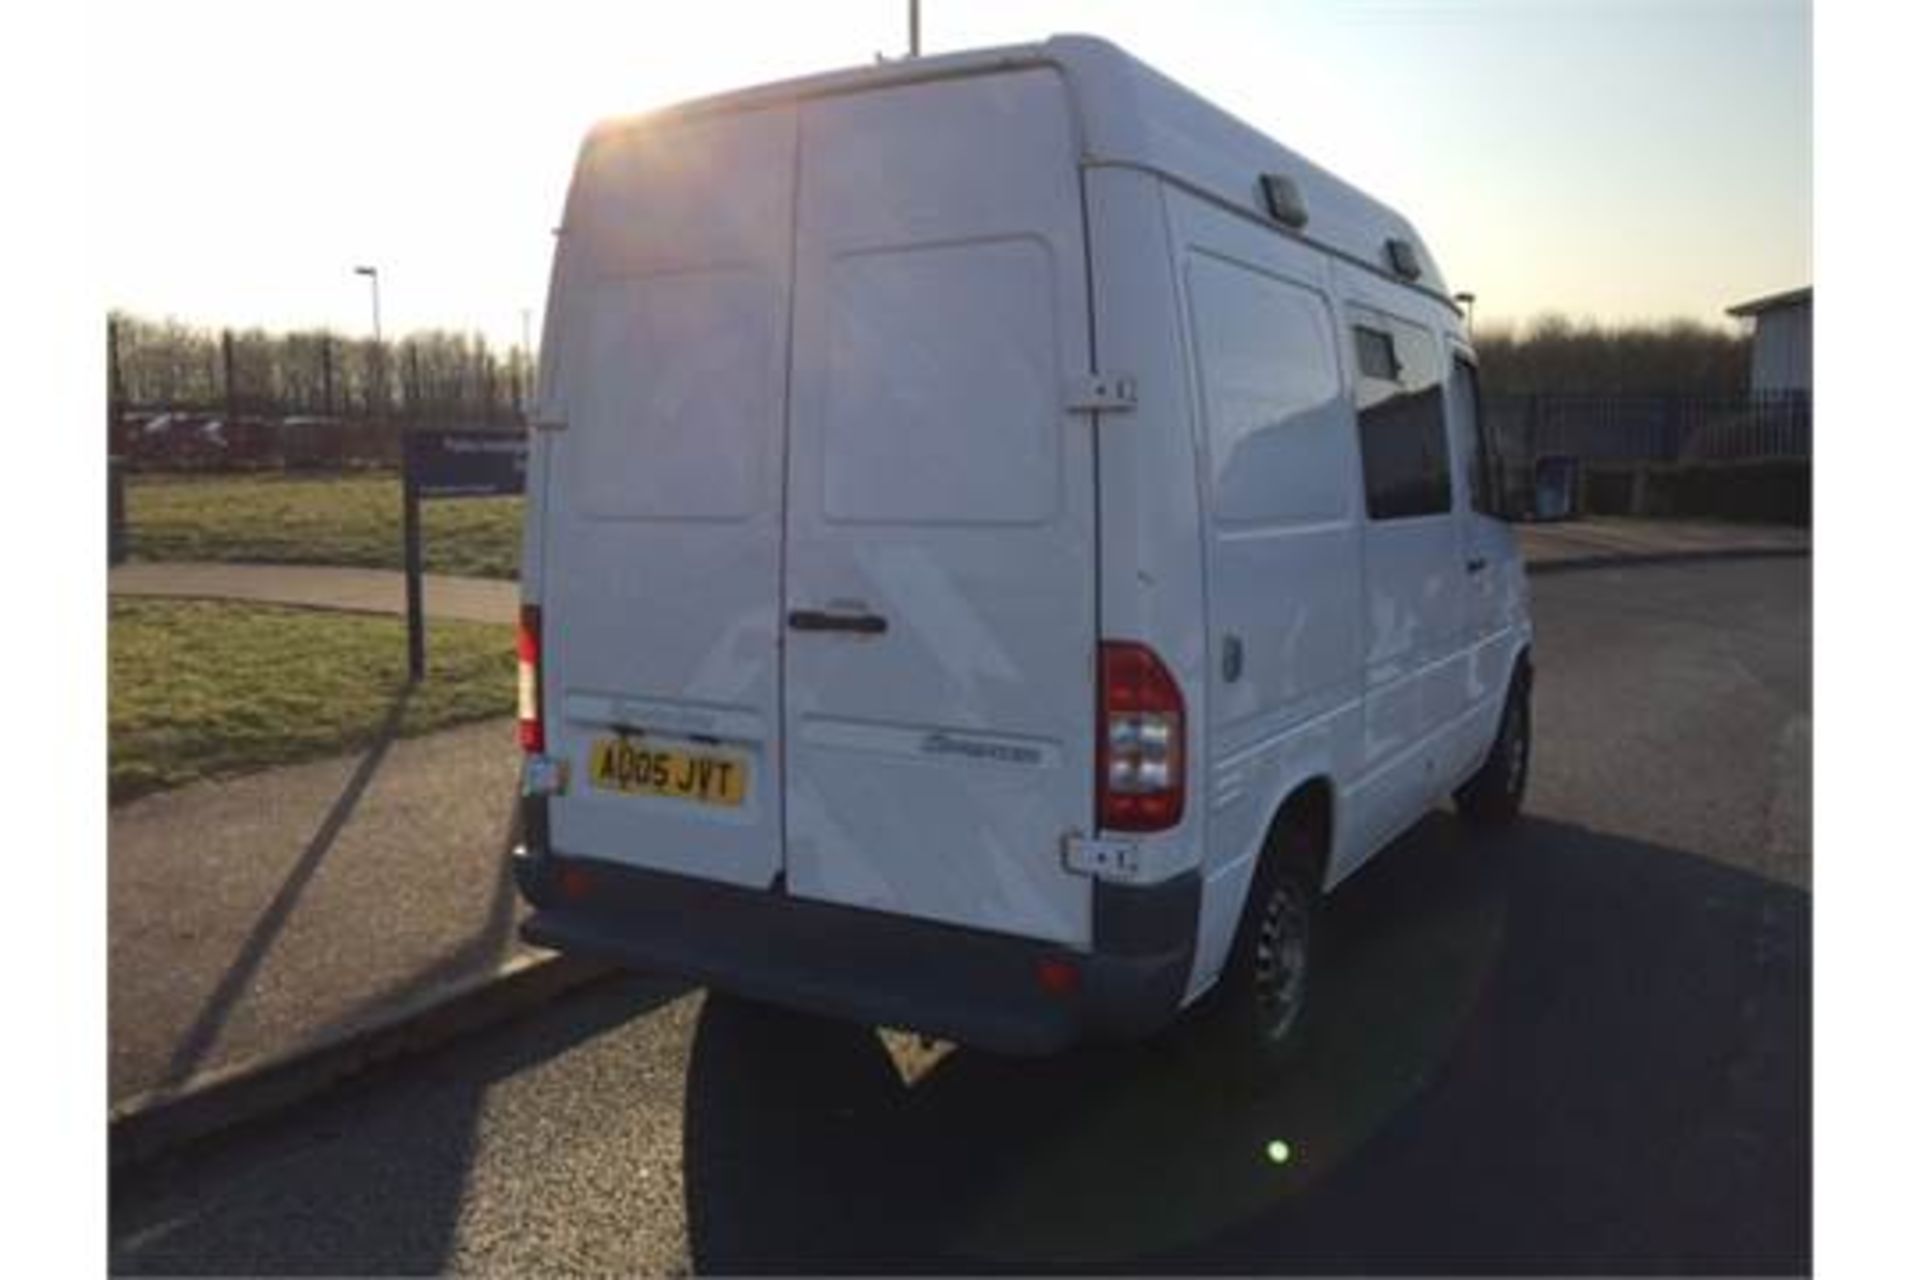 2005 Mercedes Sprinter 311 cdi 2148cc Diesel Van with side windows Owned and used by the police from - Image 7 of 23